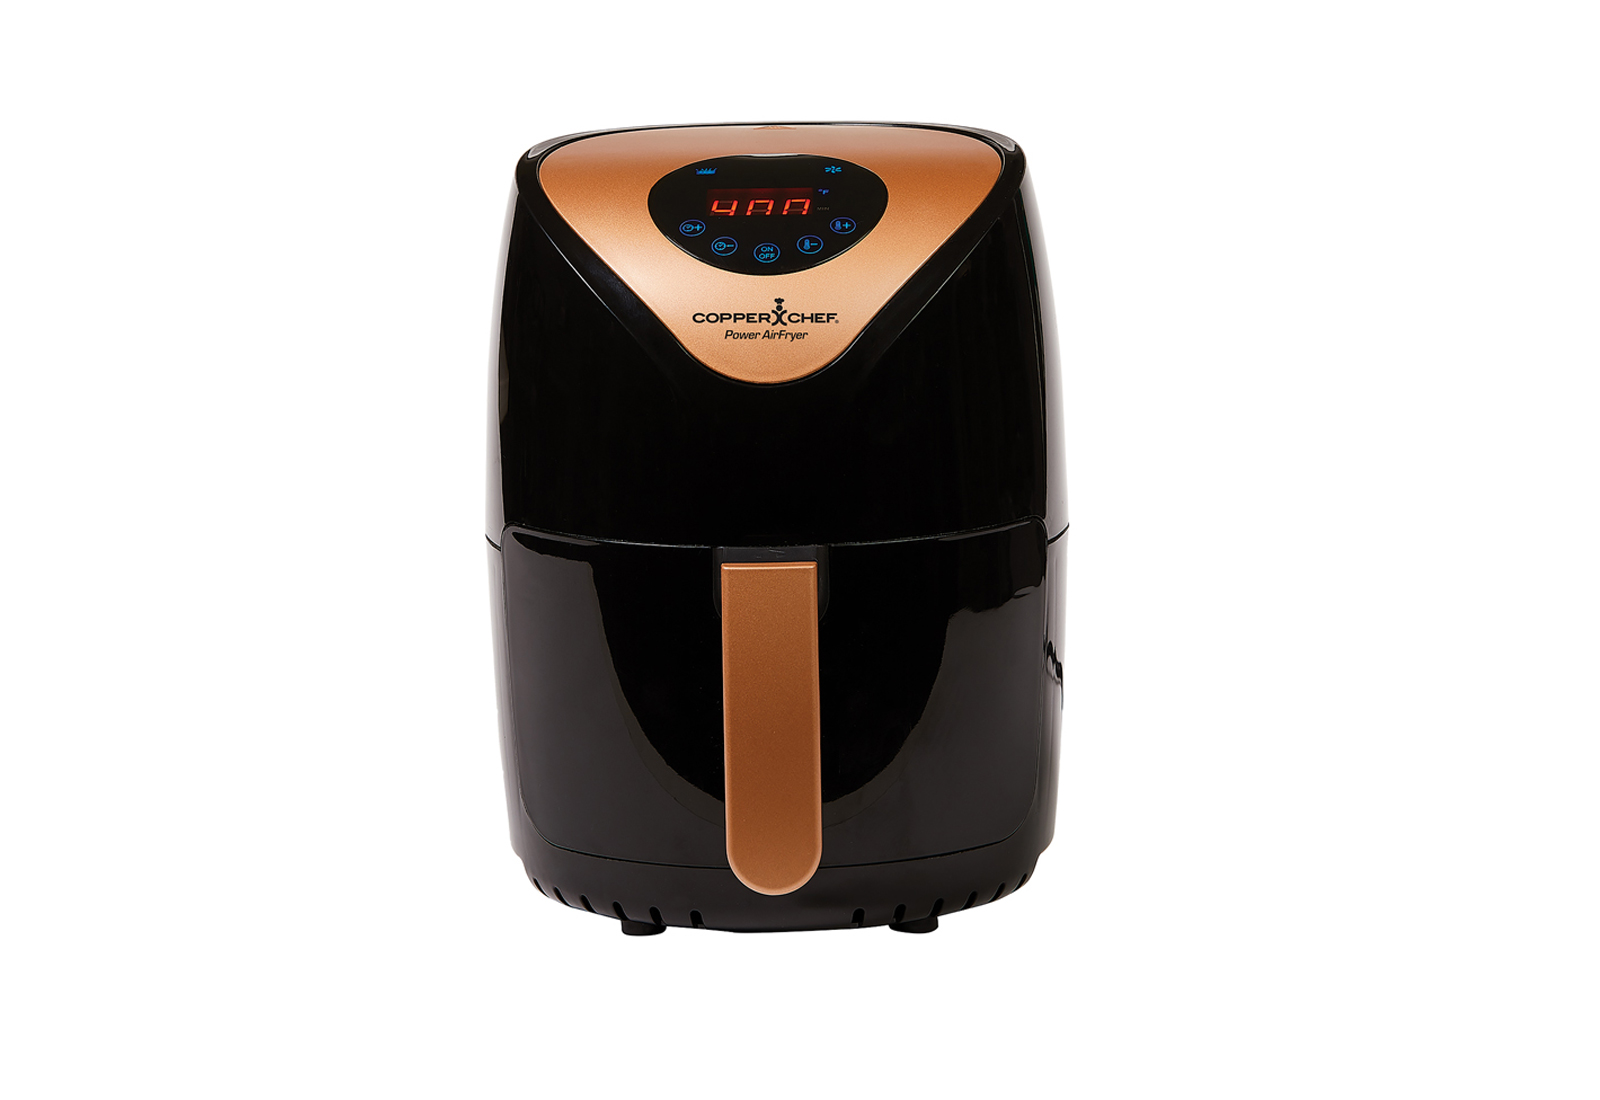 Copper Chef AirFryer Product Image